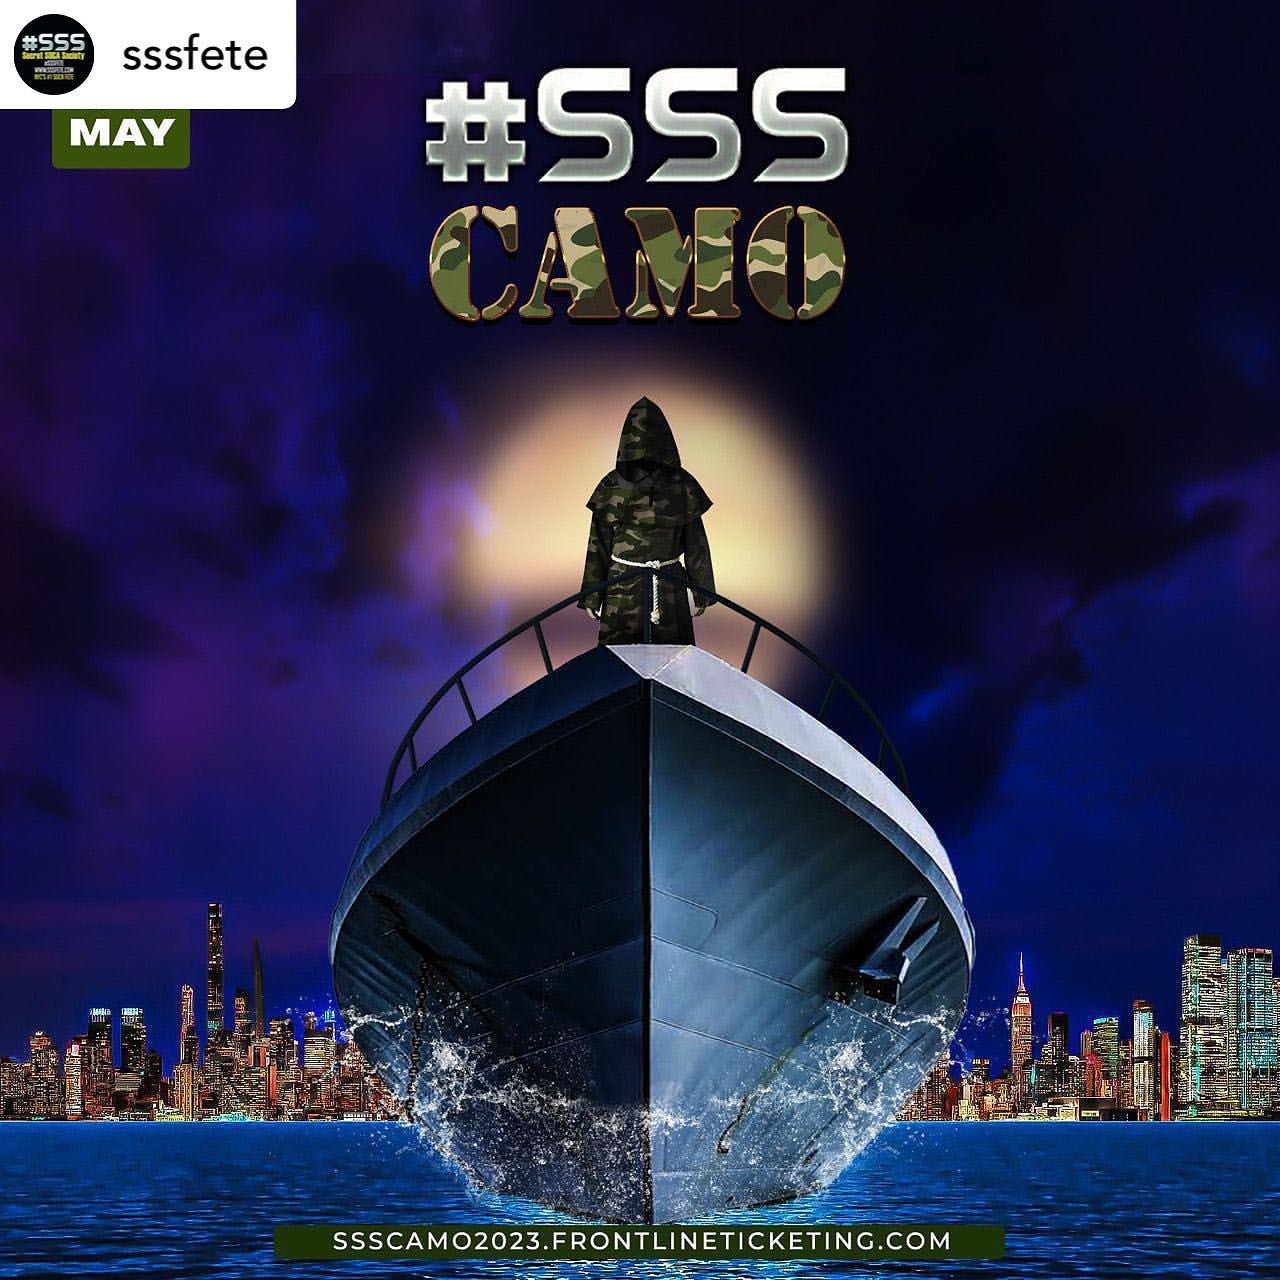 #SSŠ Family! We waking up the Ocean! .

The ship may seem far but it is right there waiting for you to board. 

This Memorial Friday 27th May, 2023!

We waking up the Ocean! 

Secret Soca Society gives you the Annual Camo Bachanaal Boat!!!

Get Your Tickets and be Ready to PUMP! 

Sssfete.frontlineticketing.com
(Link in The Bio)

The Monk is Waiting…